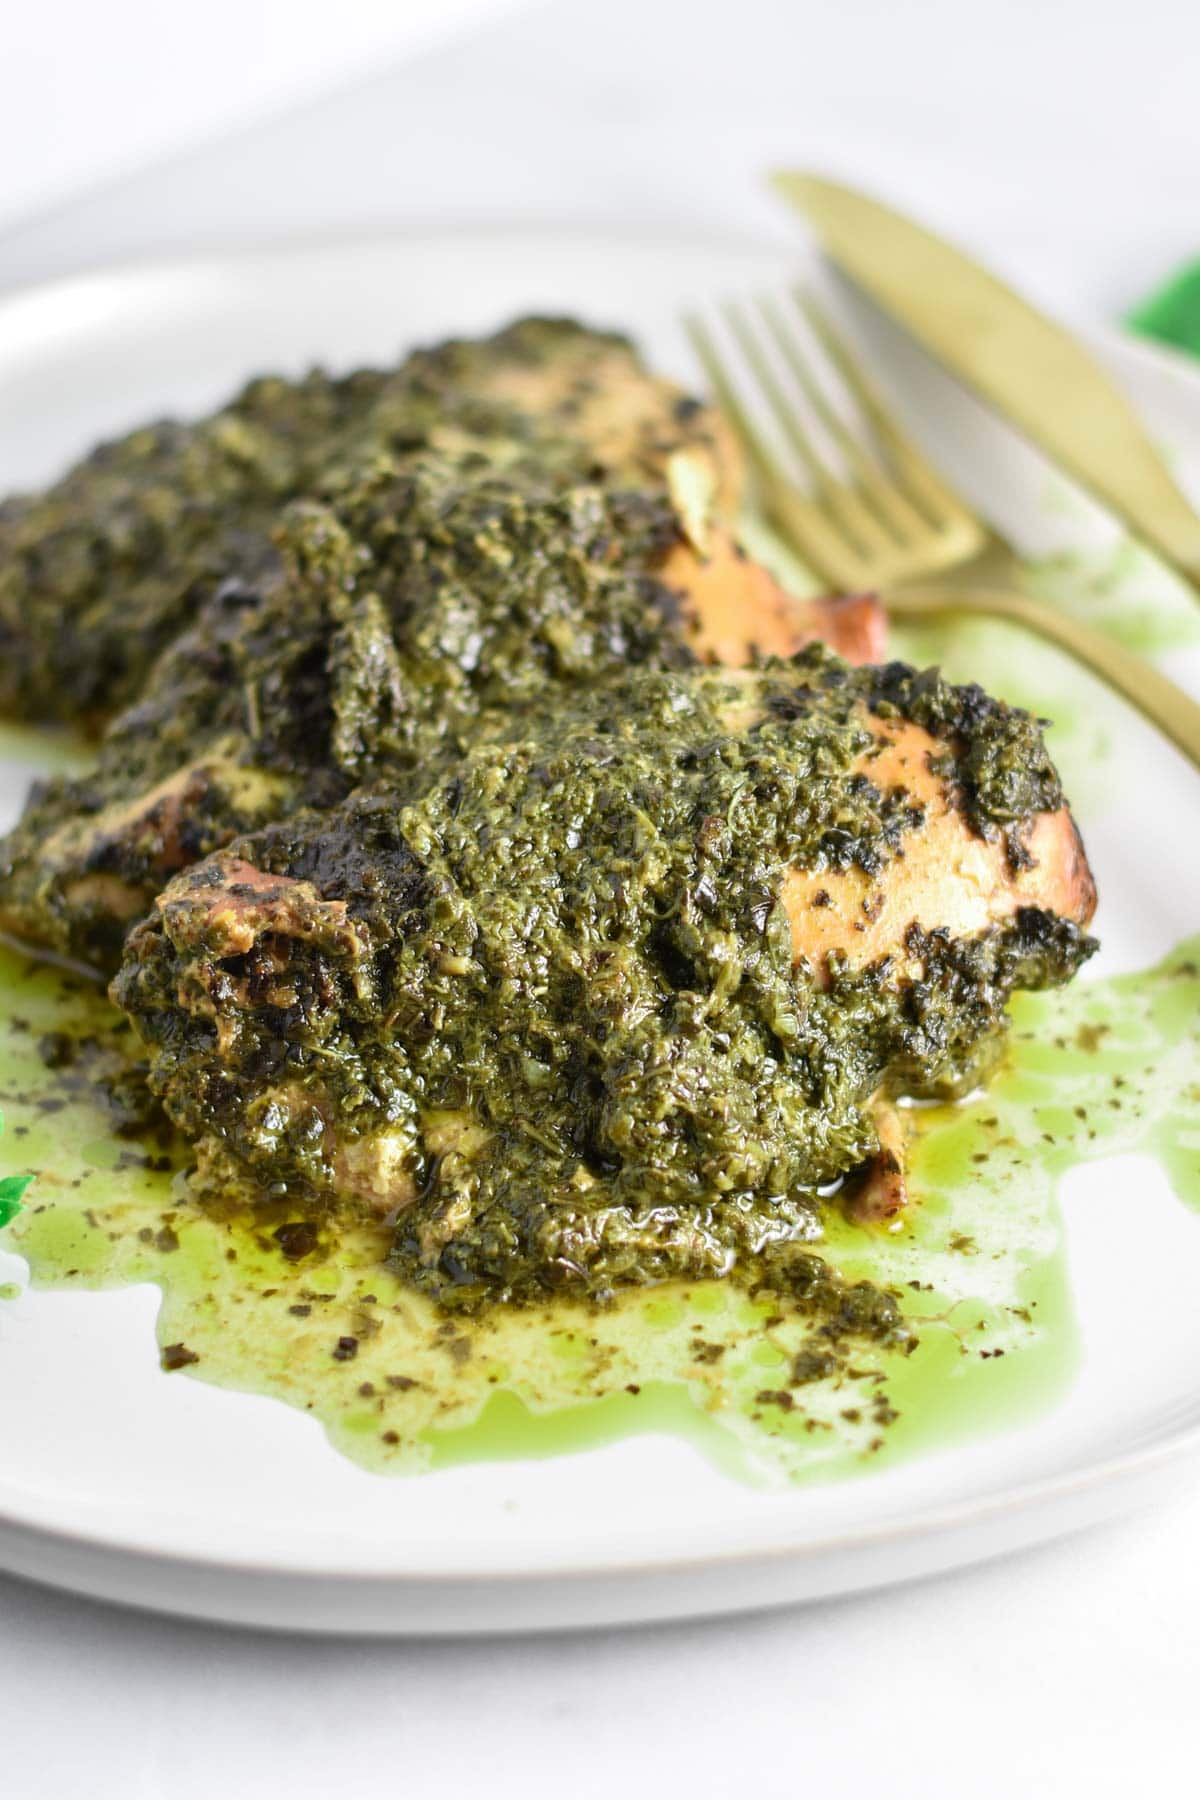 Cooked chicken topped with a pesto sauce.